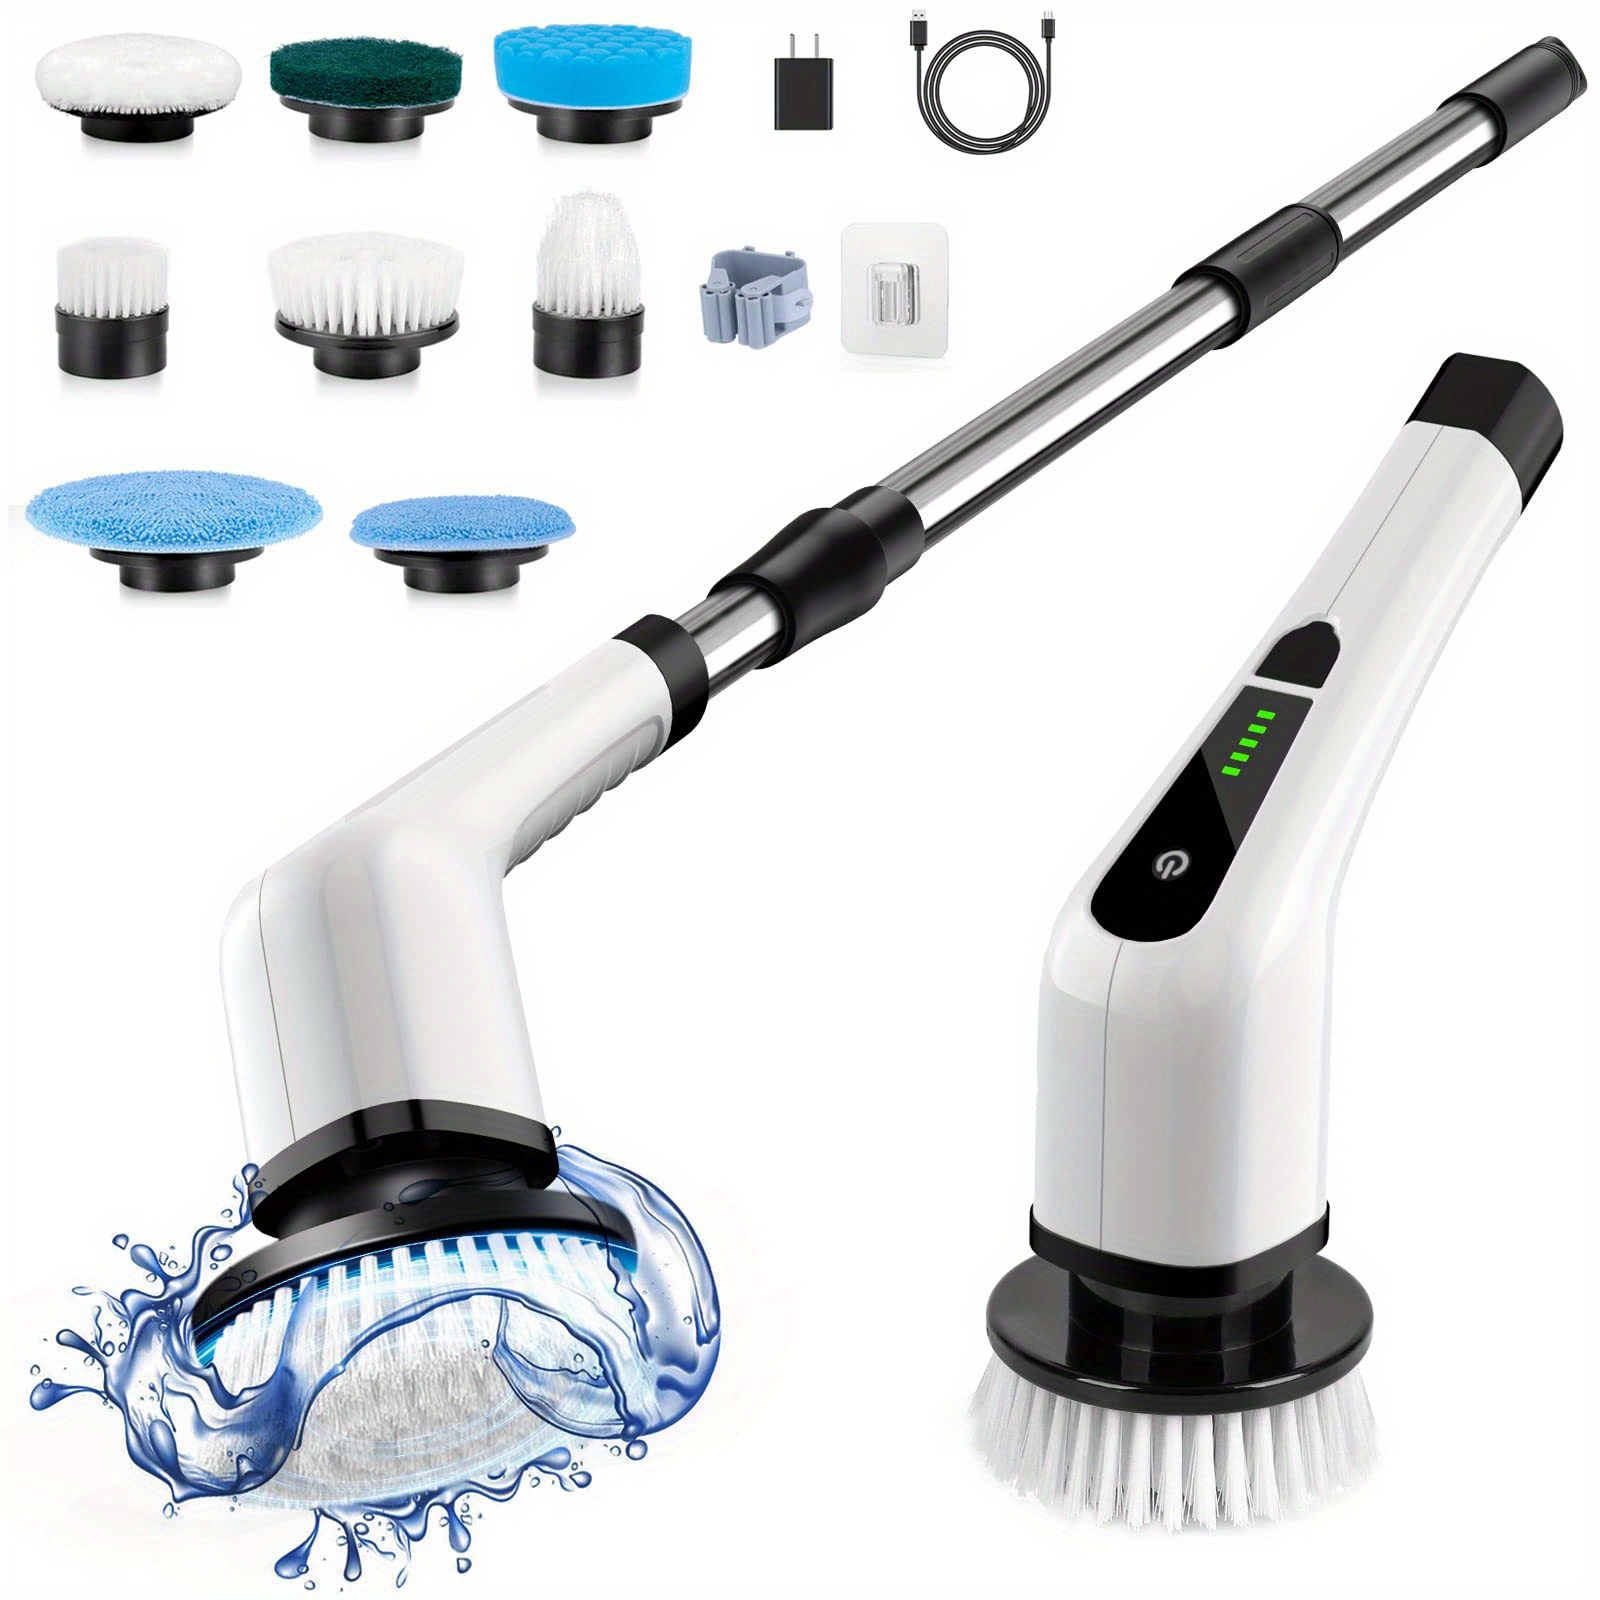 Electric Spin Scrubber, Cordless Bathroom Scrubber, Power Brush Floor  Scrubber with Adjustable Handle, 7 Multi-Purpose Cleaning Brush Heads, for